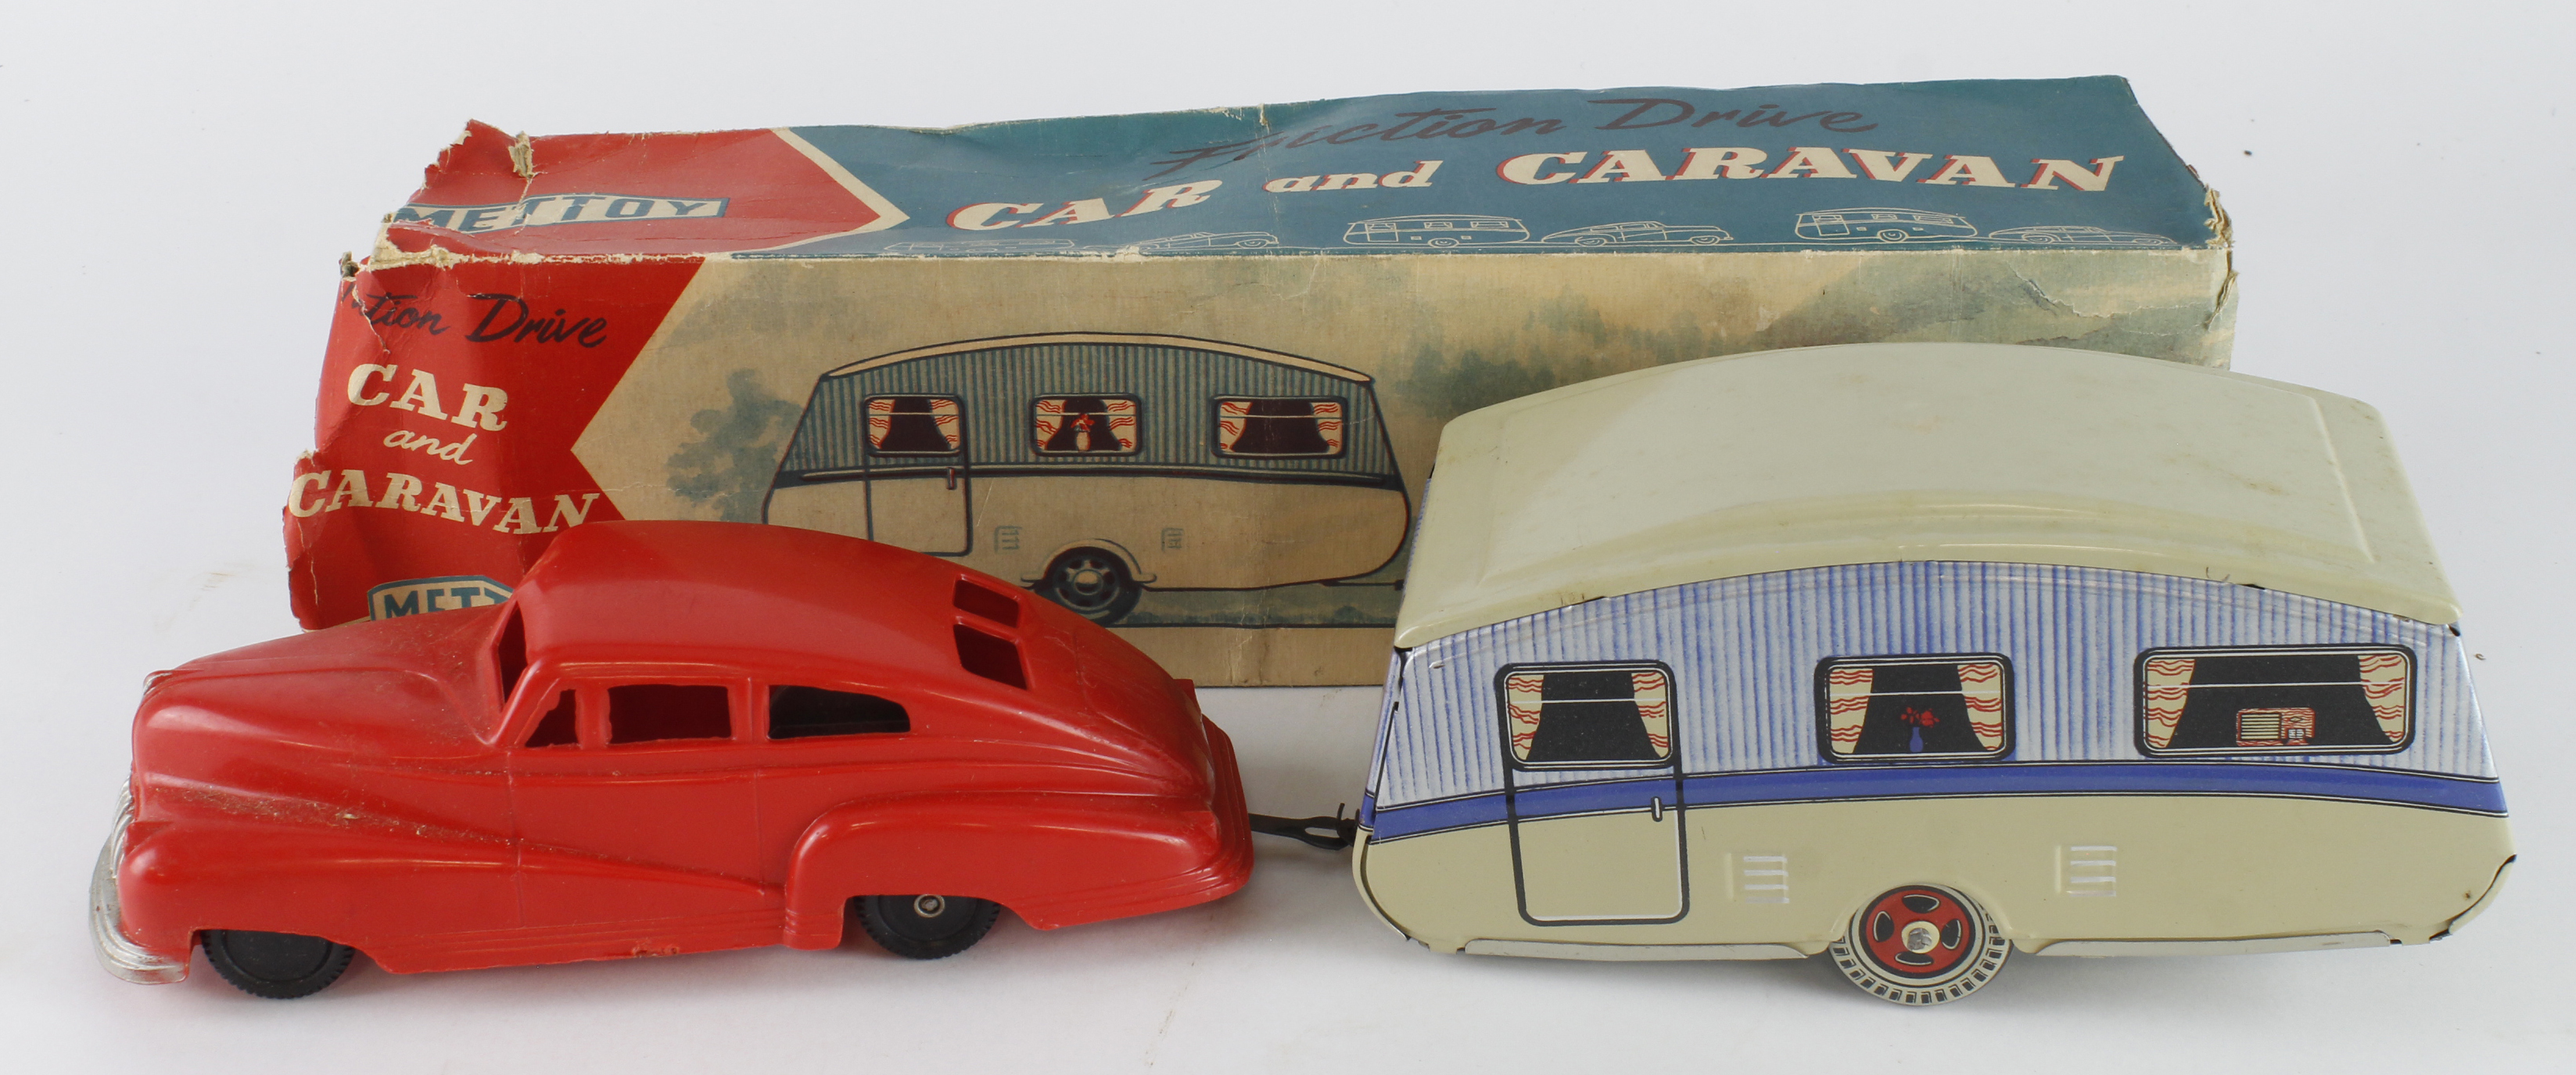 Mettoy Friction Drive car and Caravan (car - plastic; caravan - tinplate), contained in original box